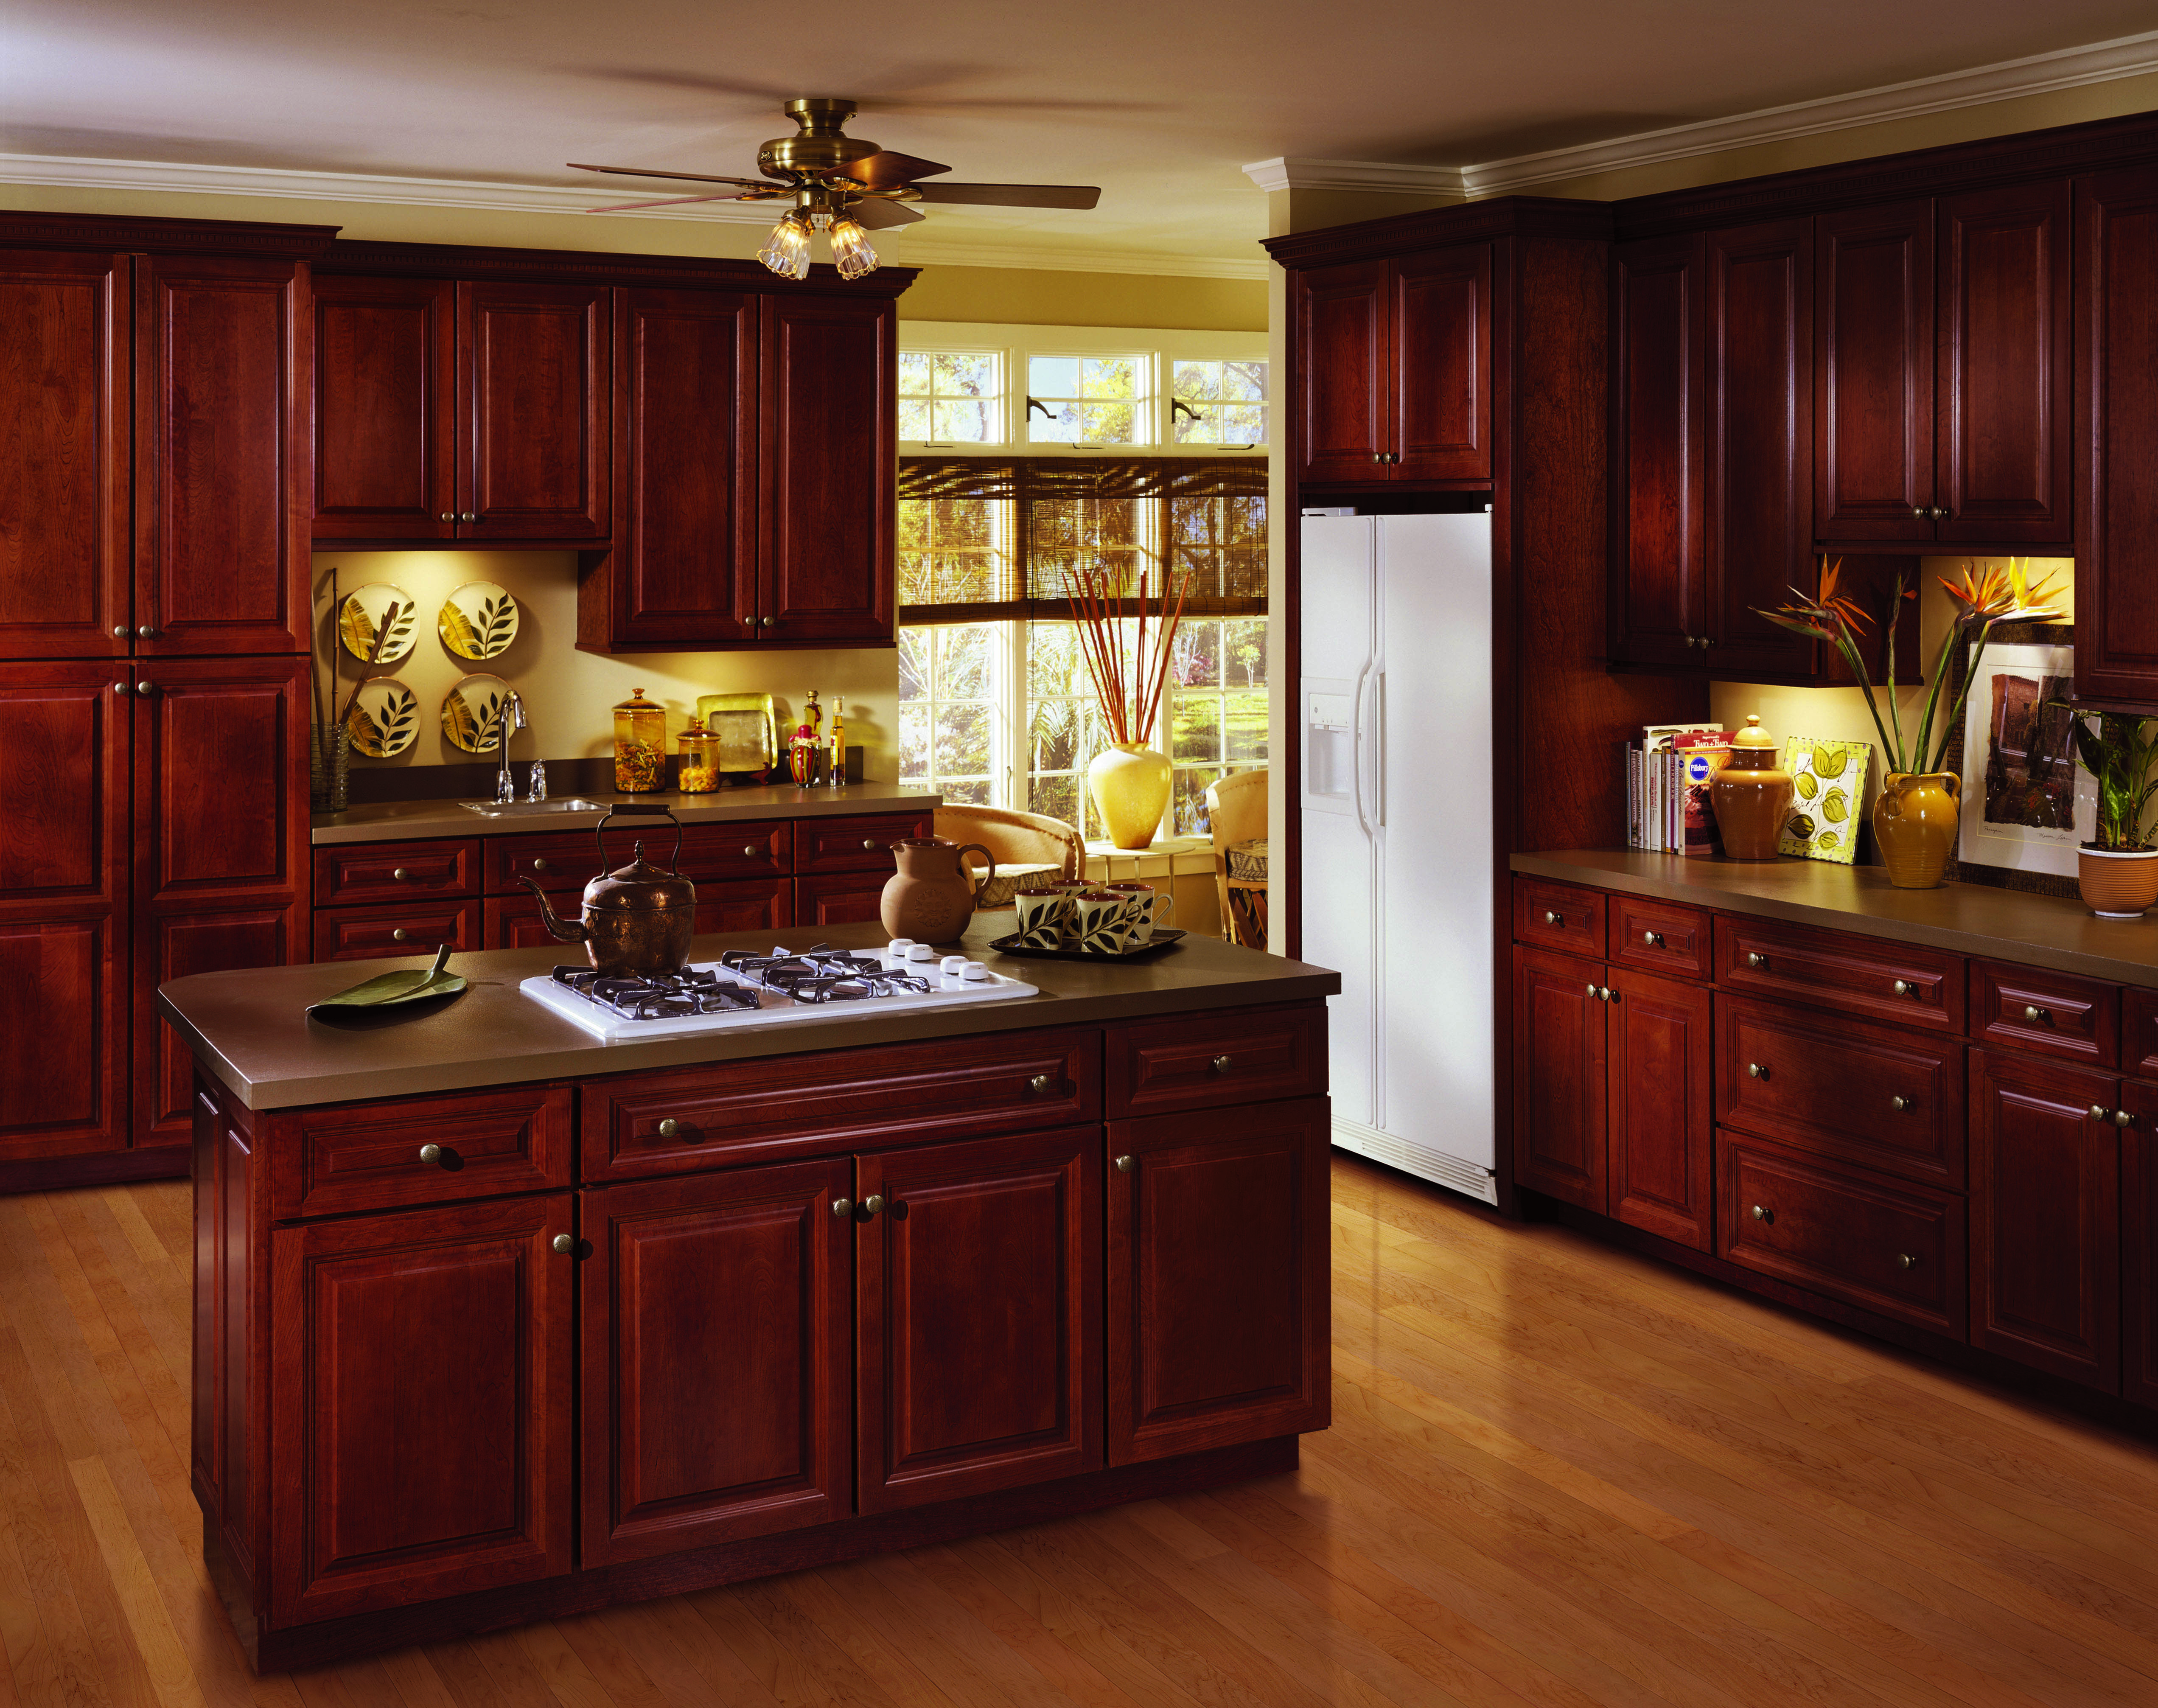 High Quality Wholesale Kitchen & Vanity at Discounted Prices